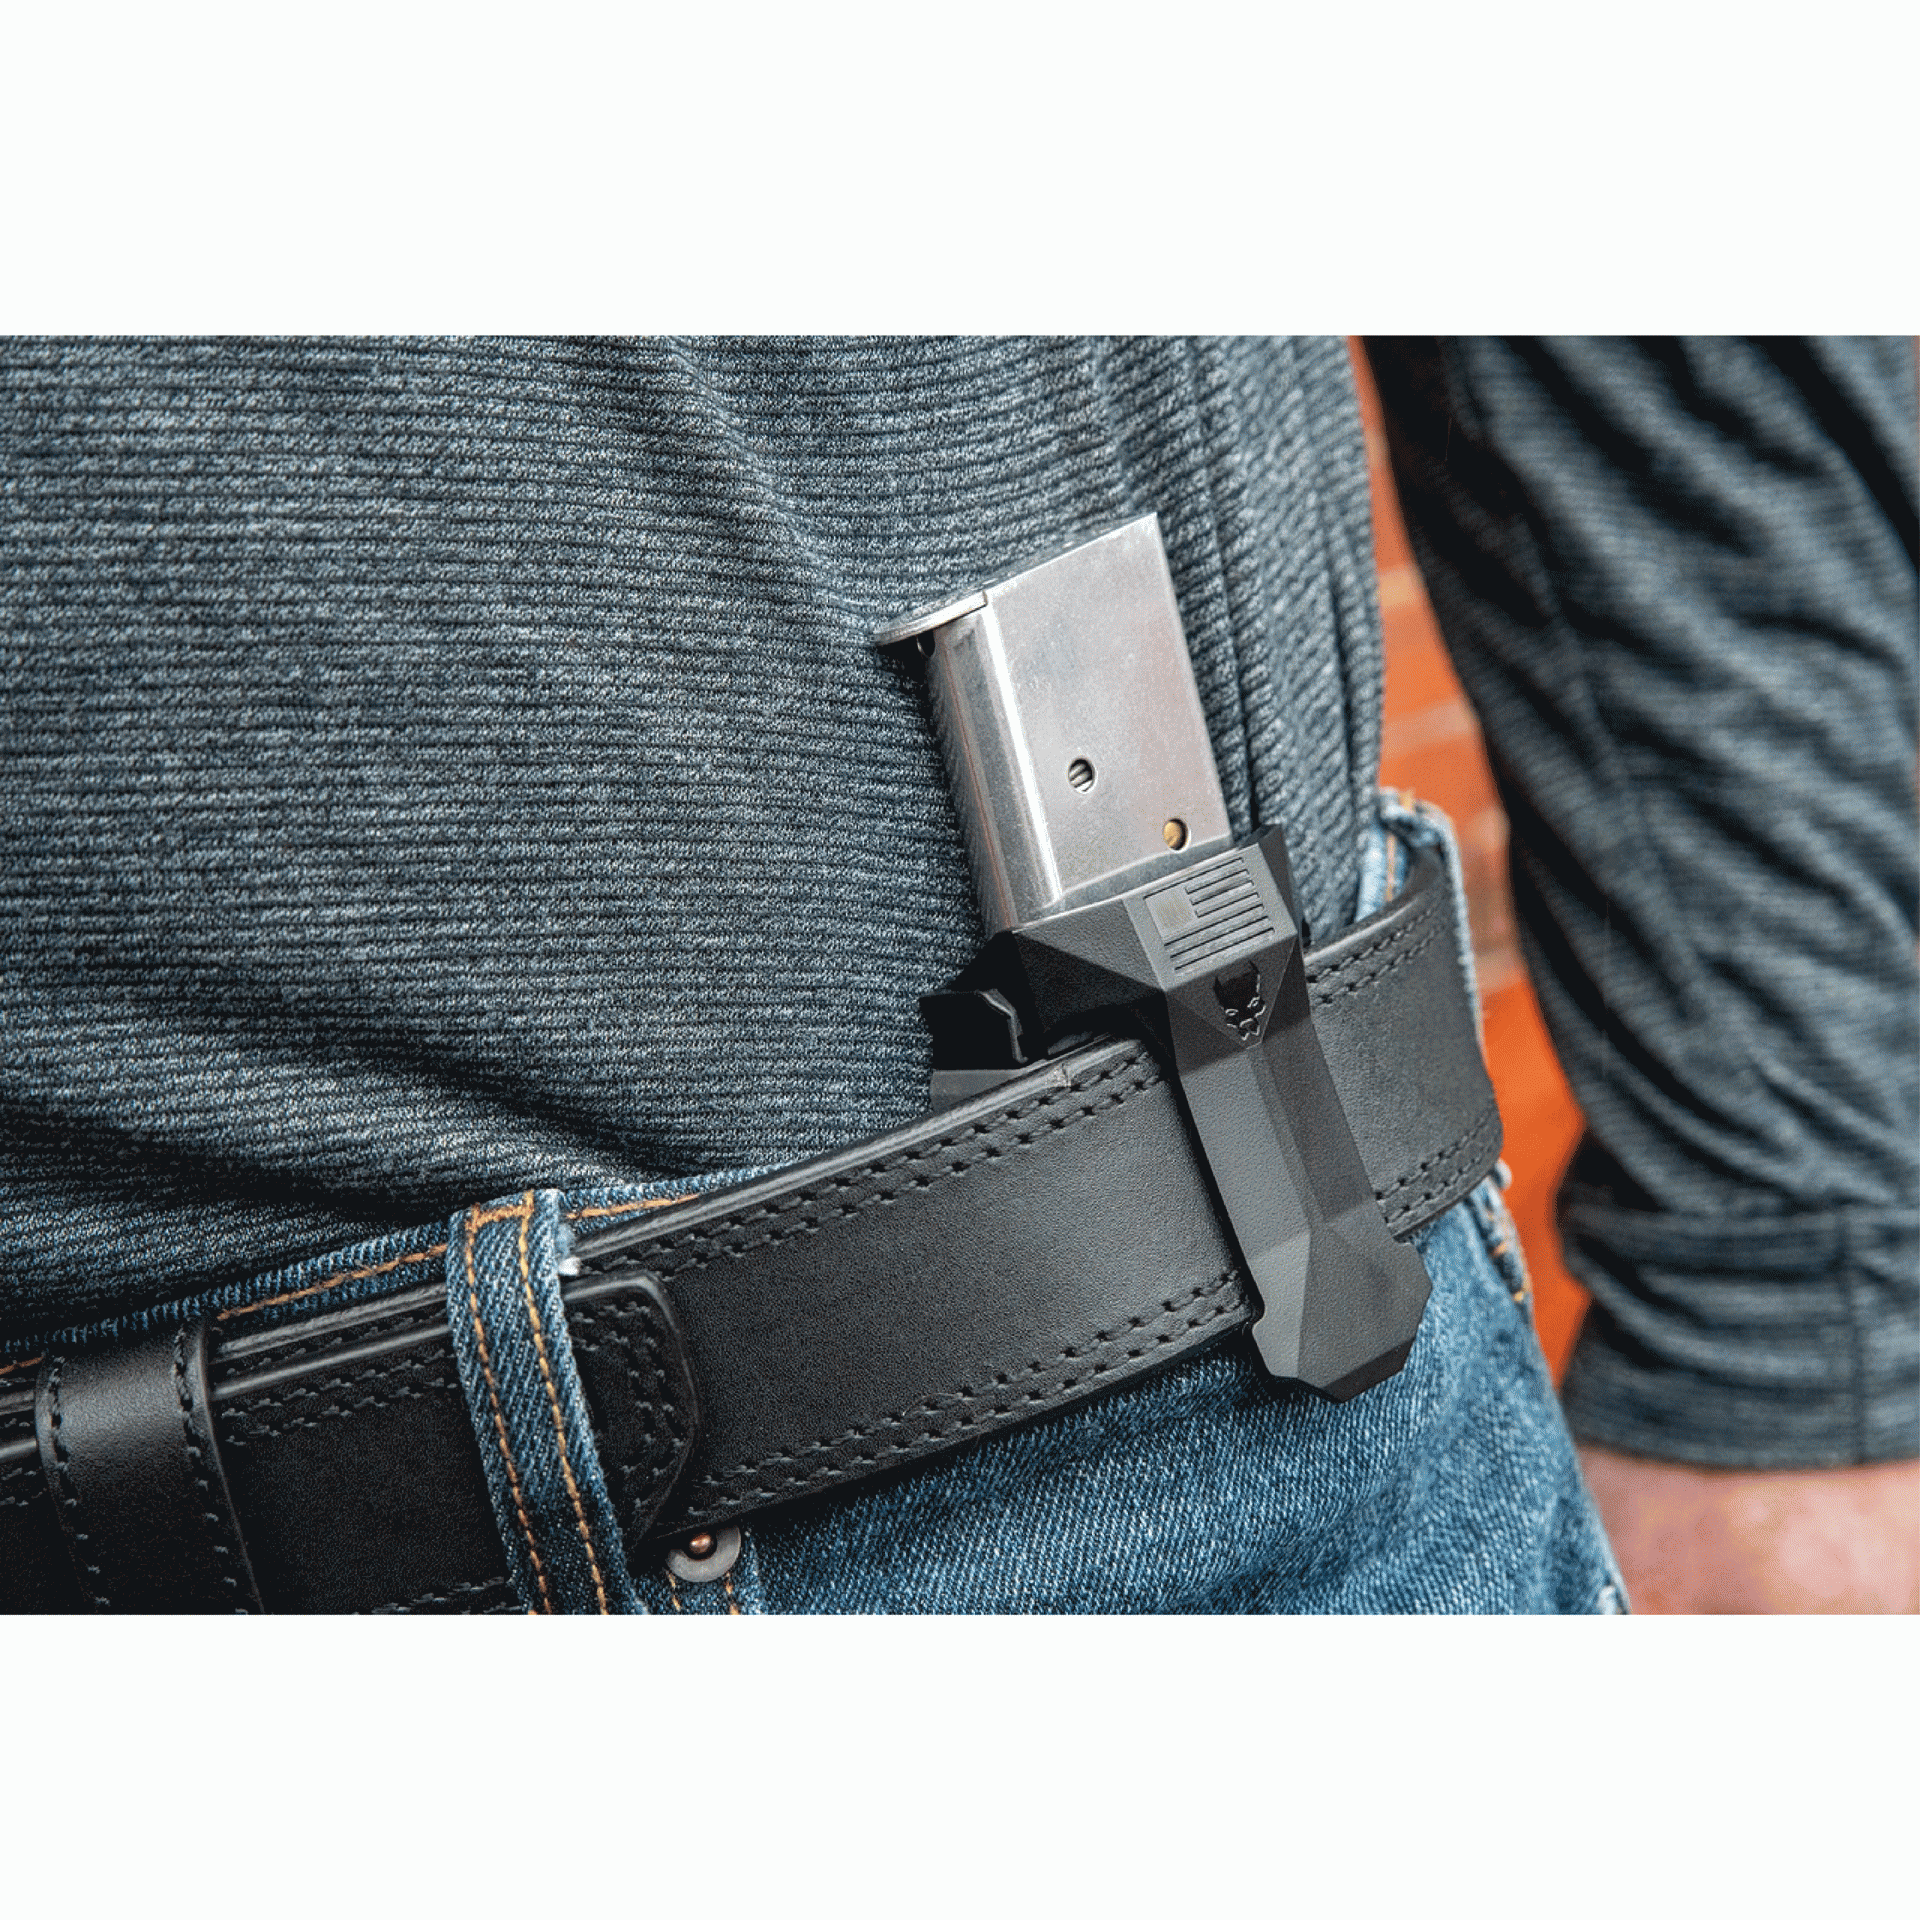 Pitbull Tactical Gen 2 Universal Pistol Mag Carrier | The Mag Shack